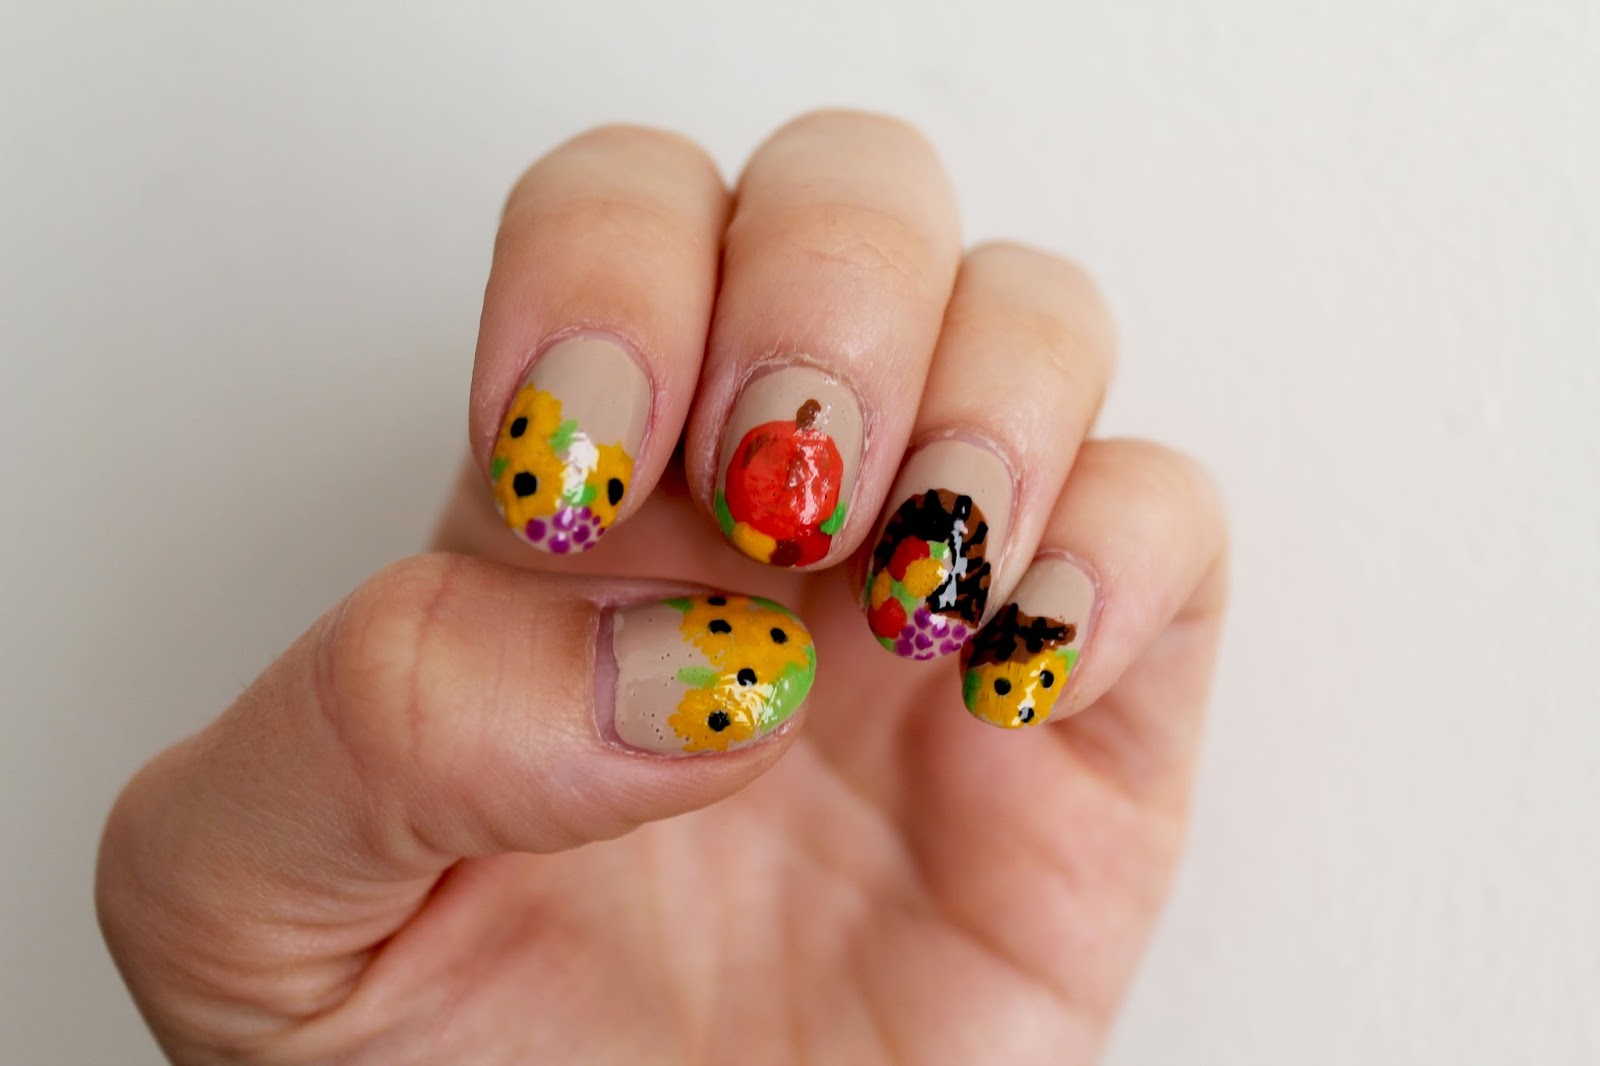 6. "Autumn-Inspired Thanksgiving Nails" - wide 1